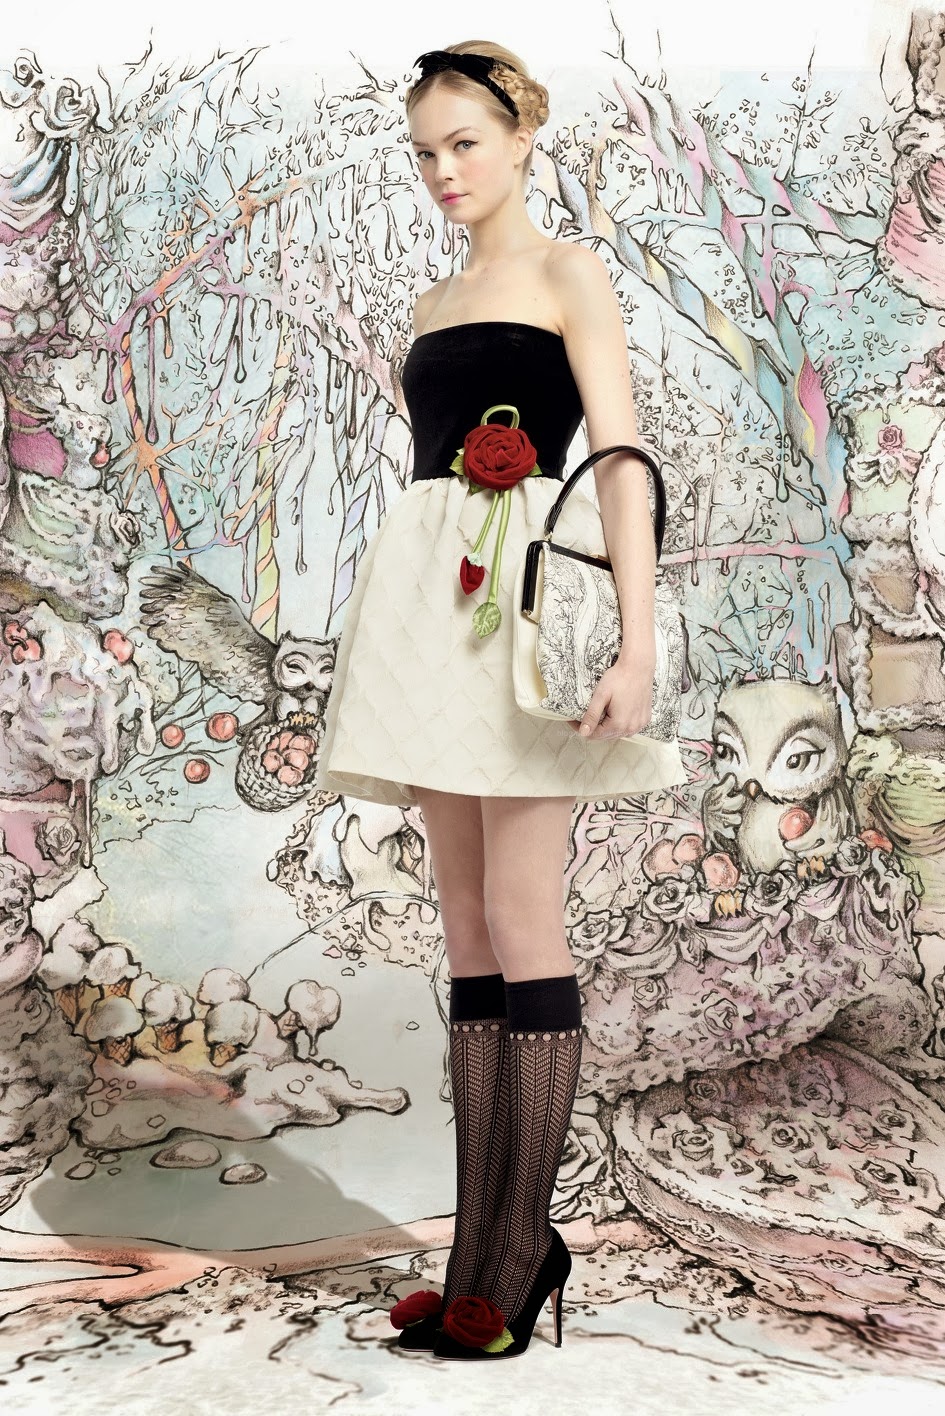 PLAYLIFE: RED Valentino - Fall 2013 Collection